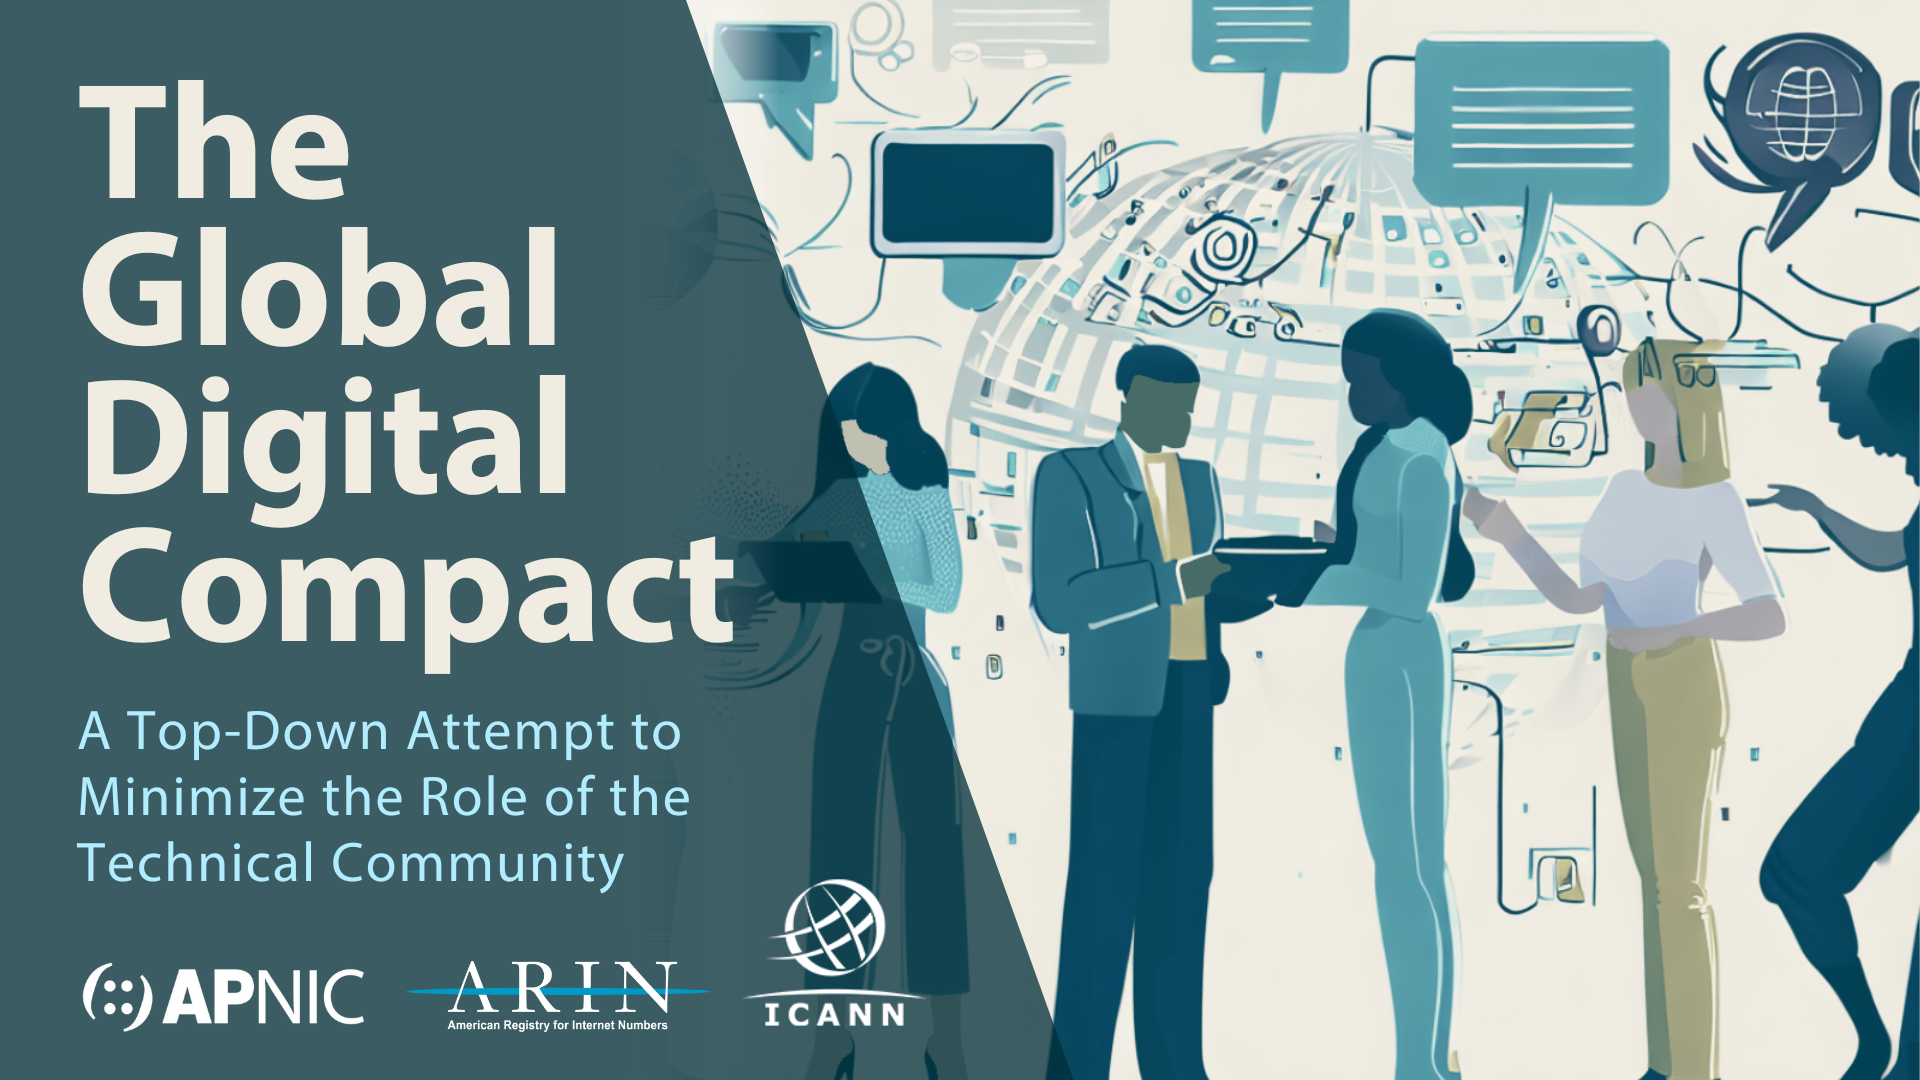 The Global Digital Compact: A Top-Down Attempt to Minimize the Role of the Technical Community